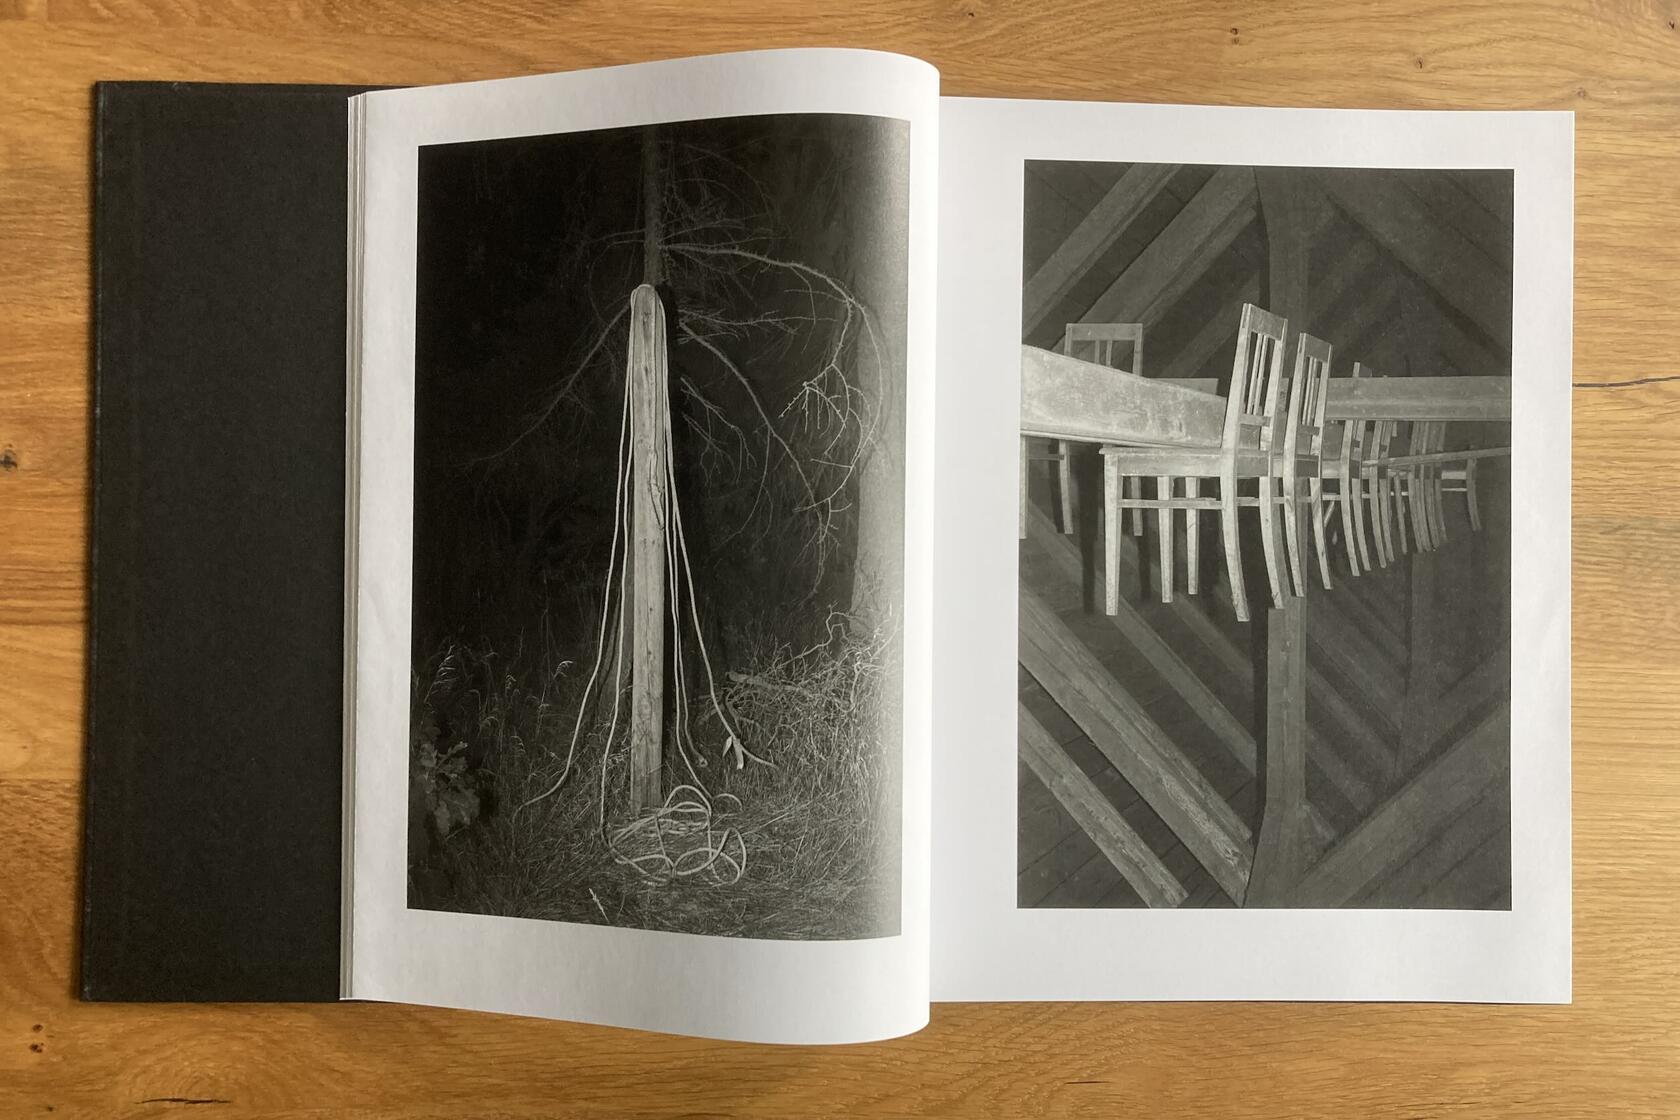 Two pages from the photo book 